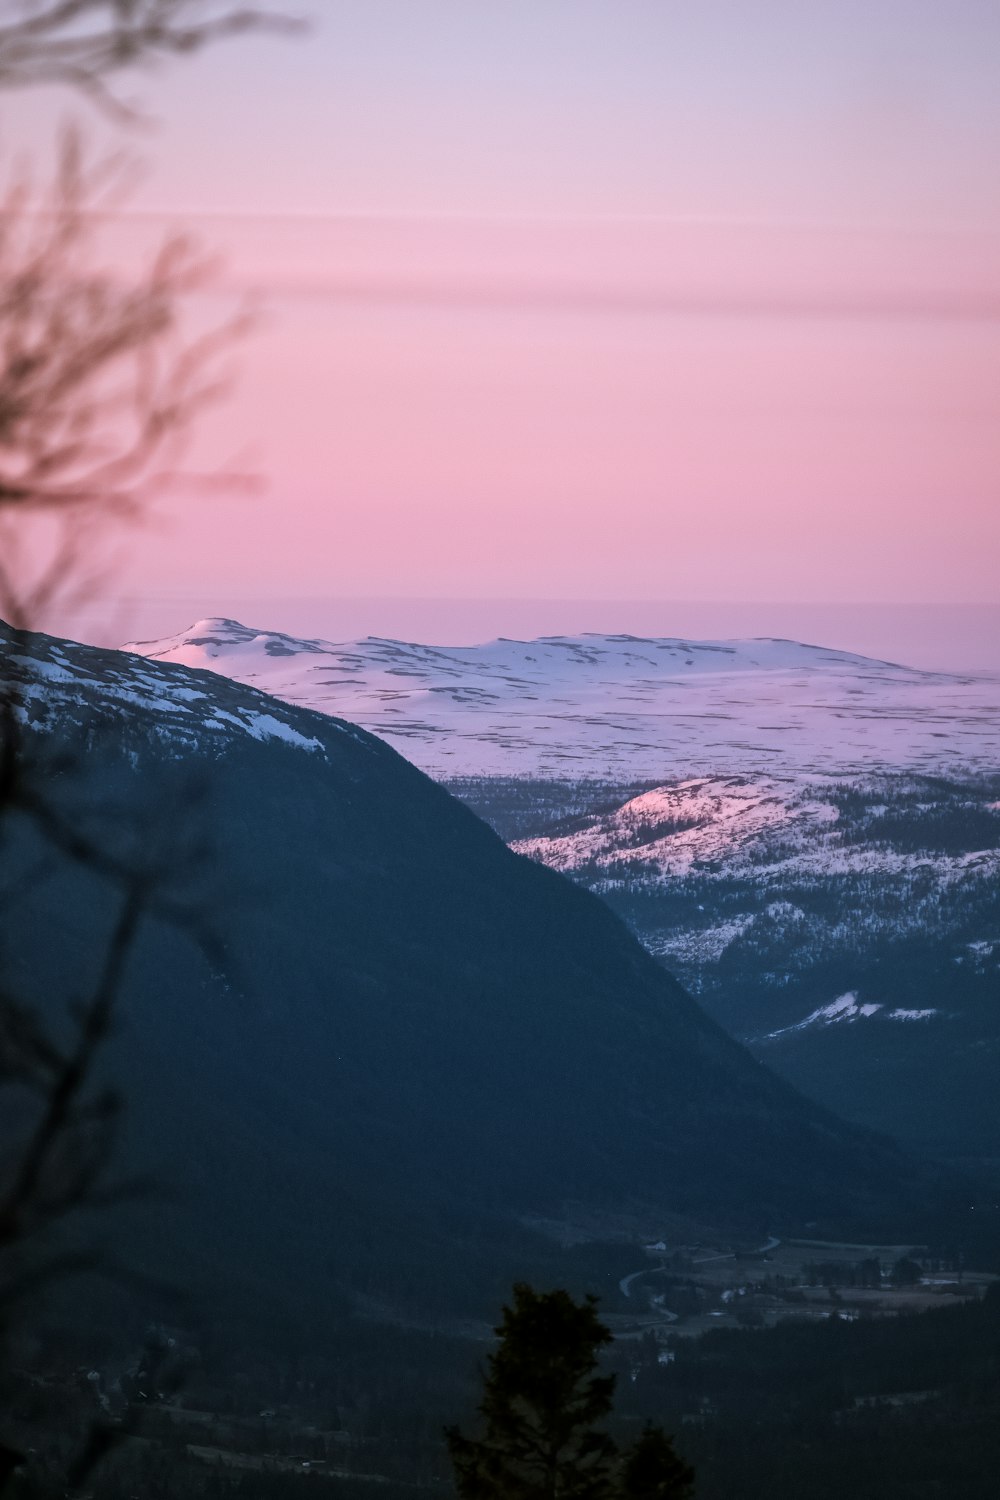 a view of a mountain with a pink sky in the background